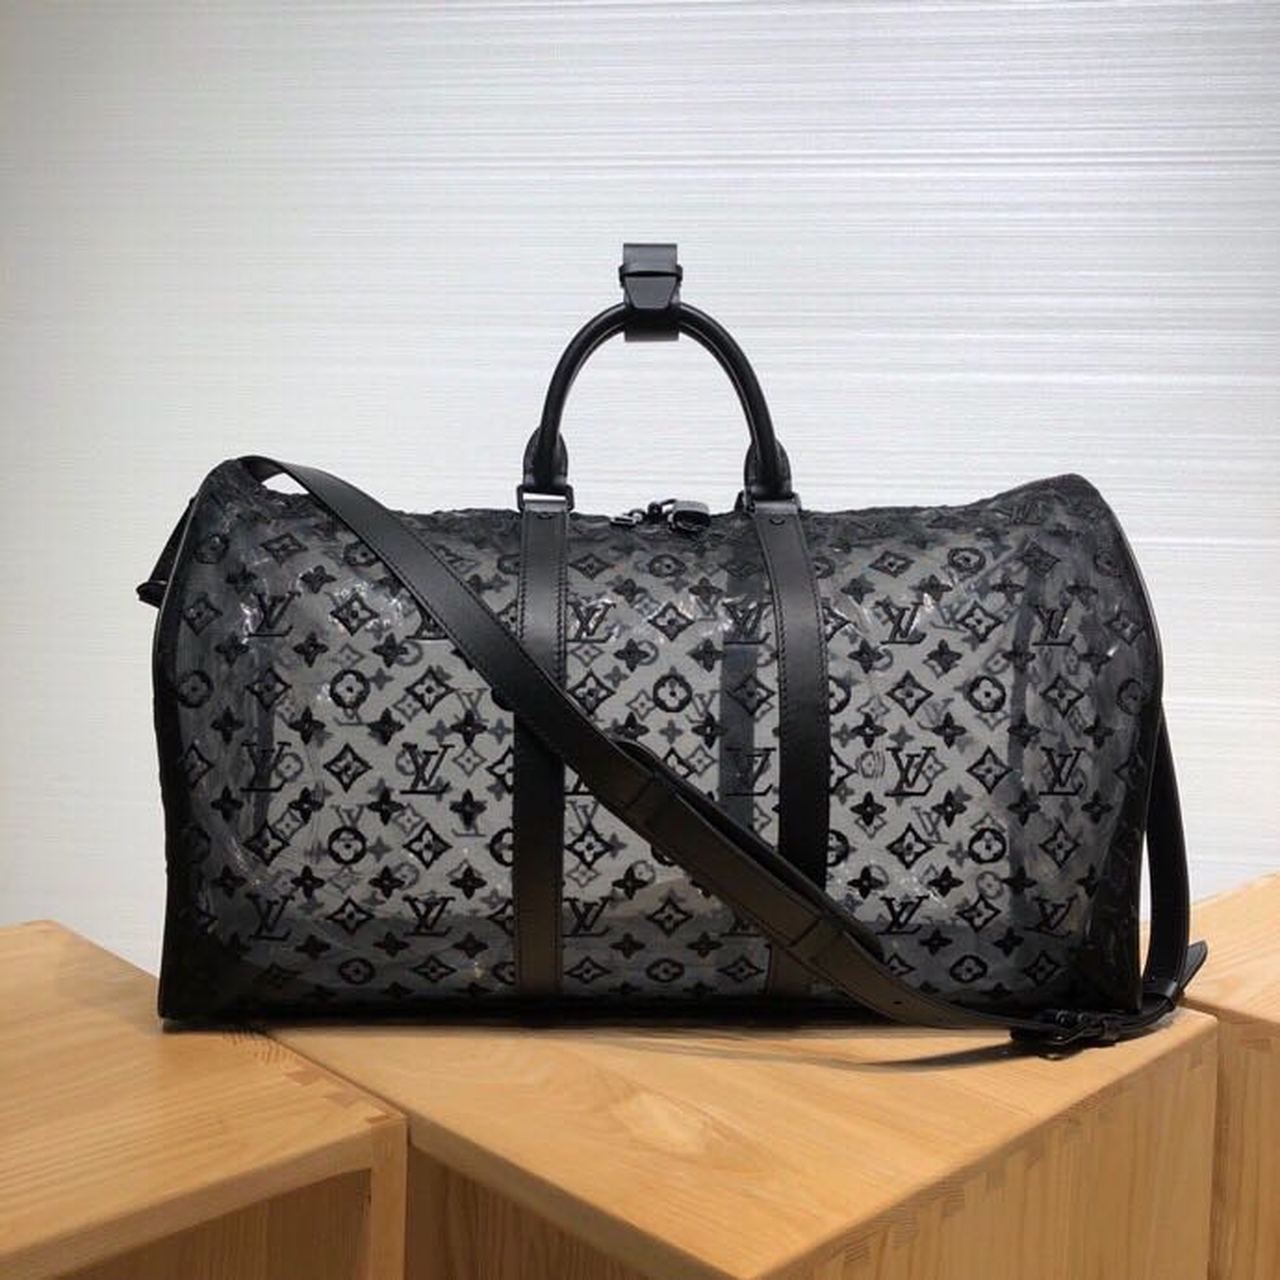 LV Keepall Bandouliere 50 Monogram Black By Virgil Abloh For Women, WoBags, Shoulder And Crossbody Bags 19.7in/50cm LV M53971